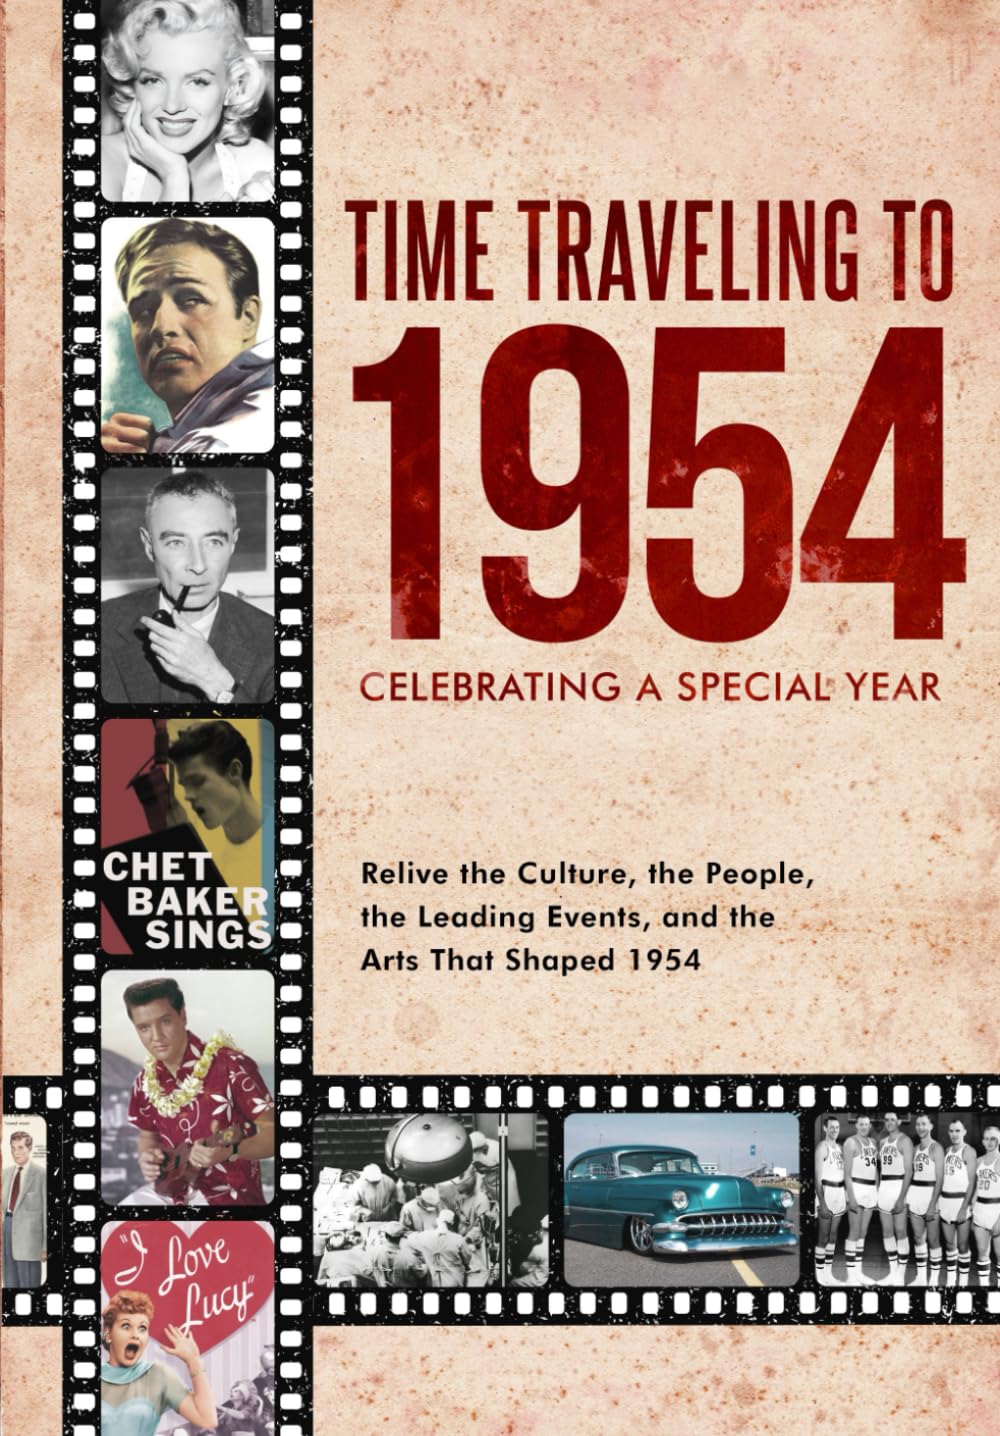 Time Traveling to 1954: Celebrating a Special Year